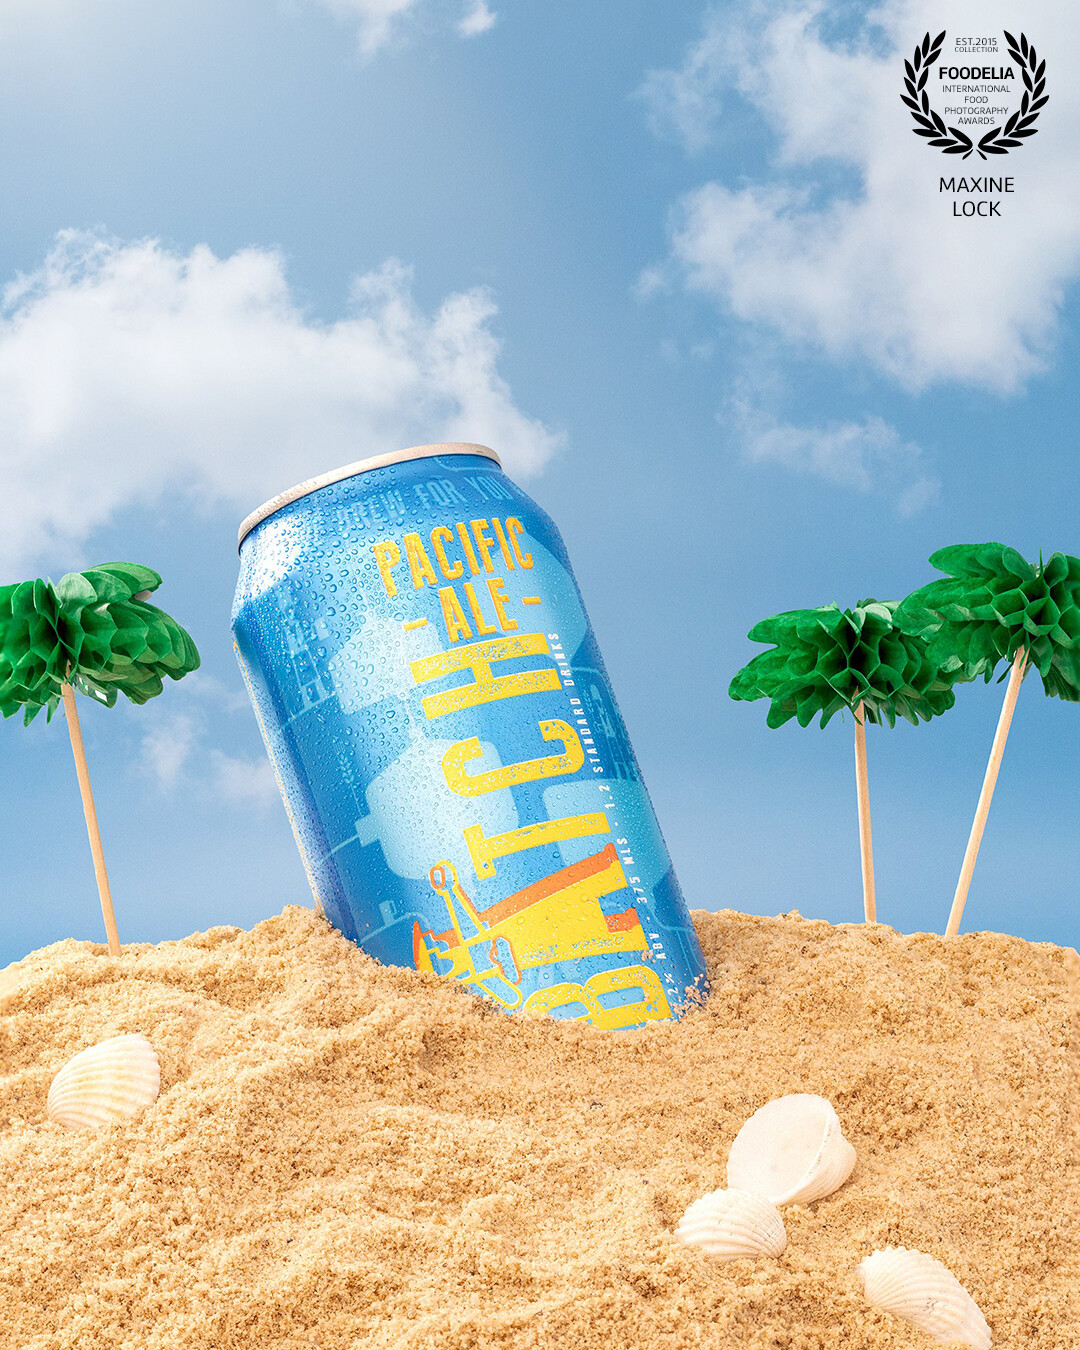 Single can of beer in a "beach in the summer" scene.  The beach scene recreated in a studio setting.